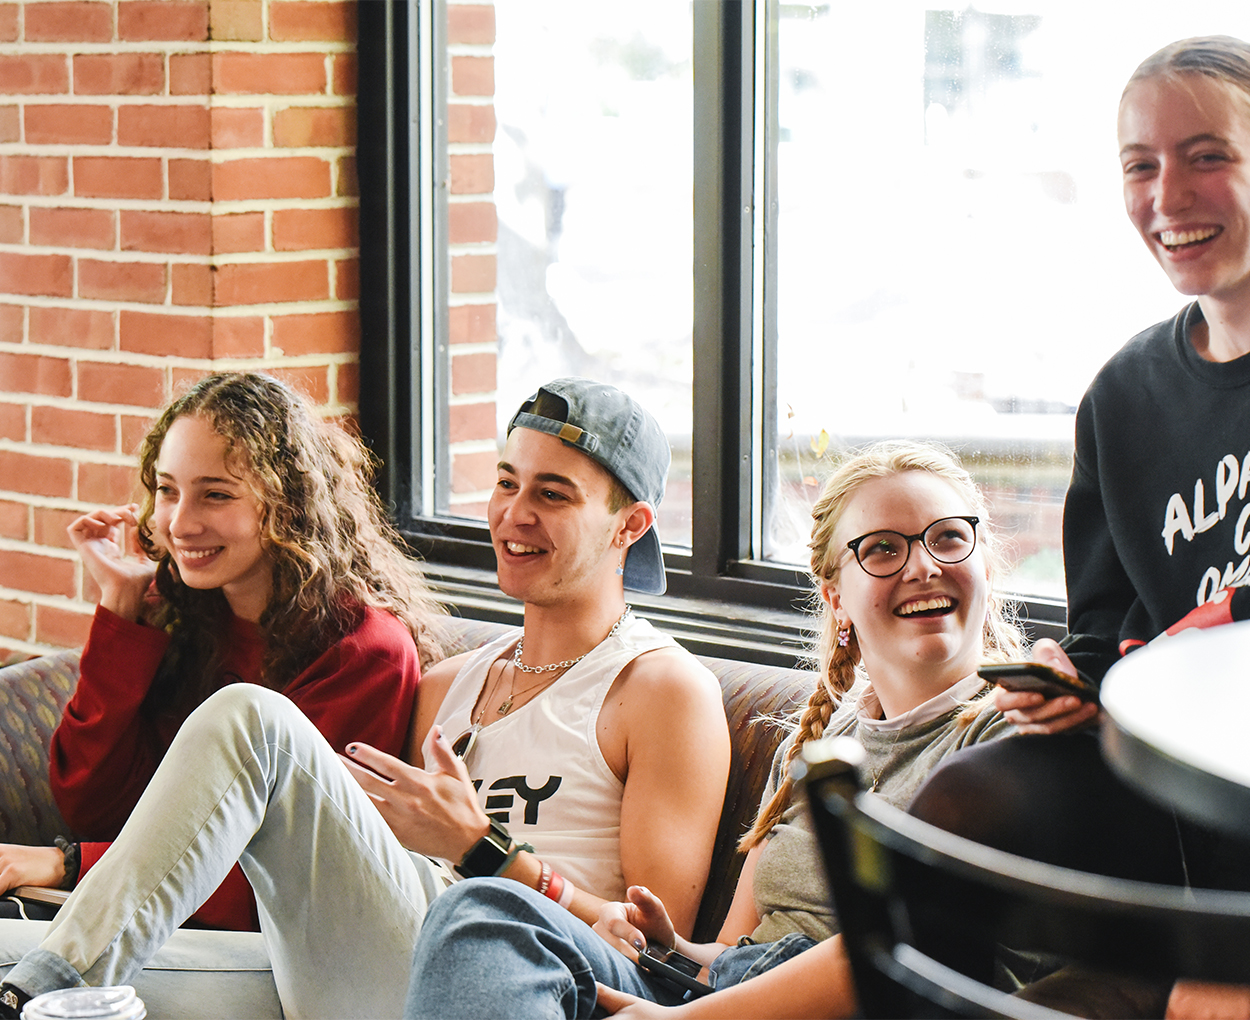 A group of students, smiling and laughing, squeeze together on a couch.